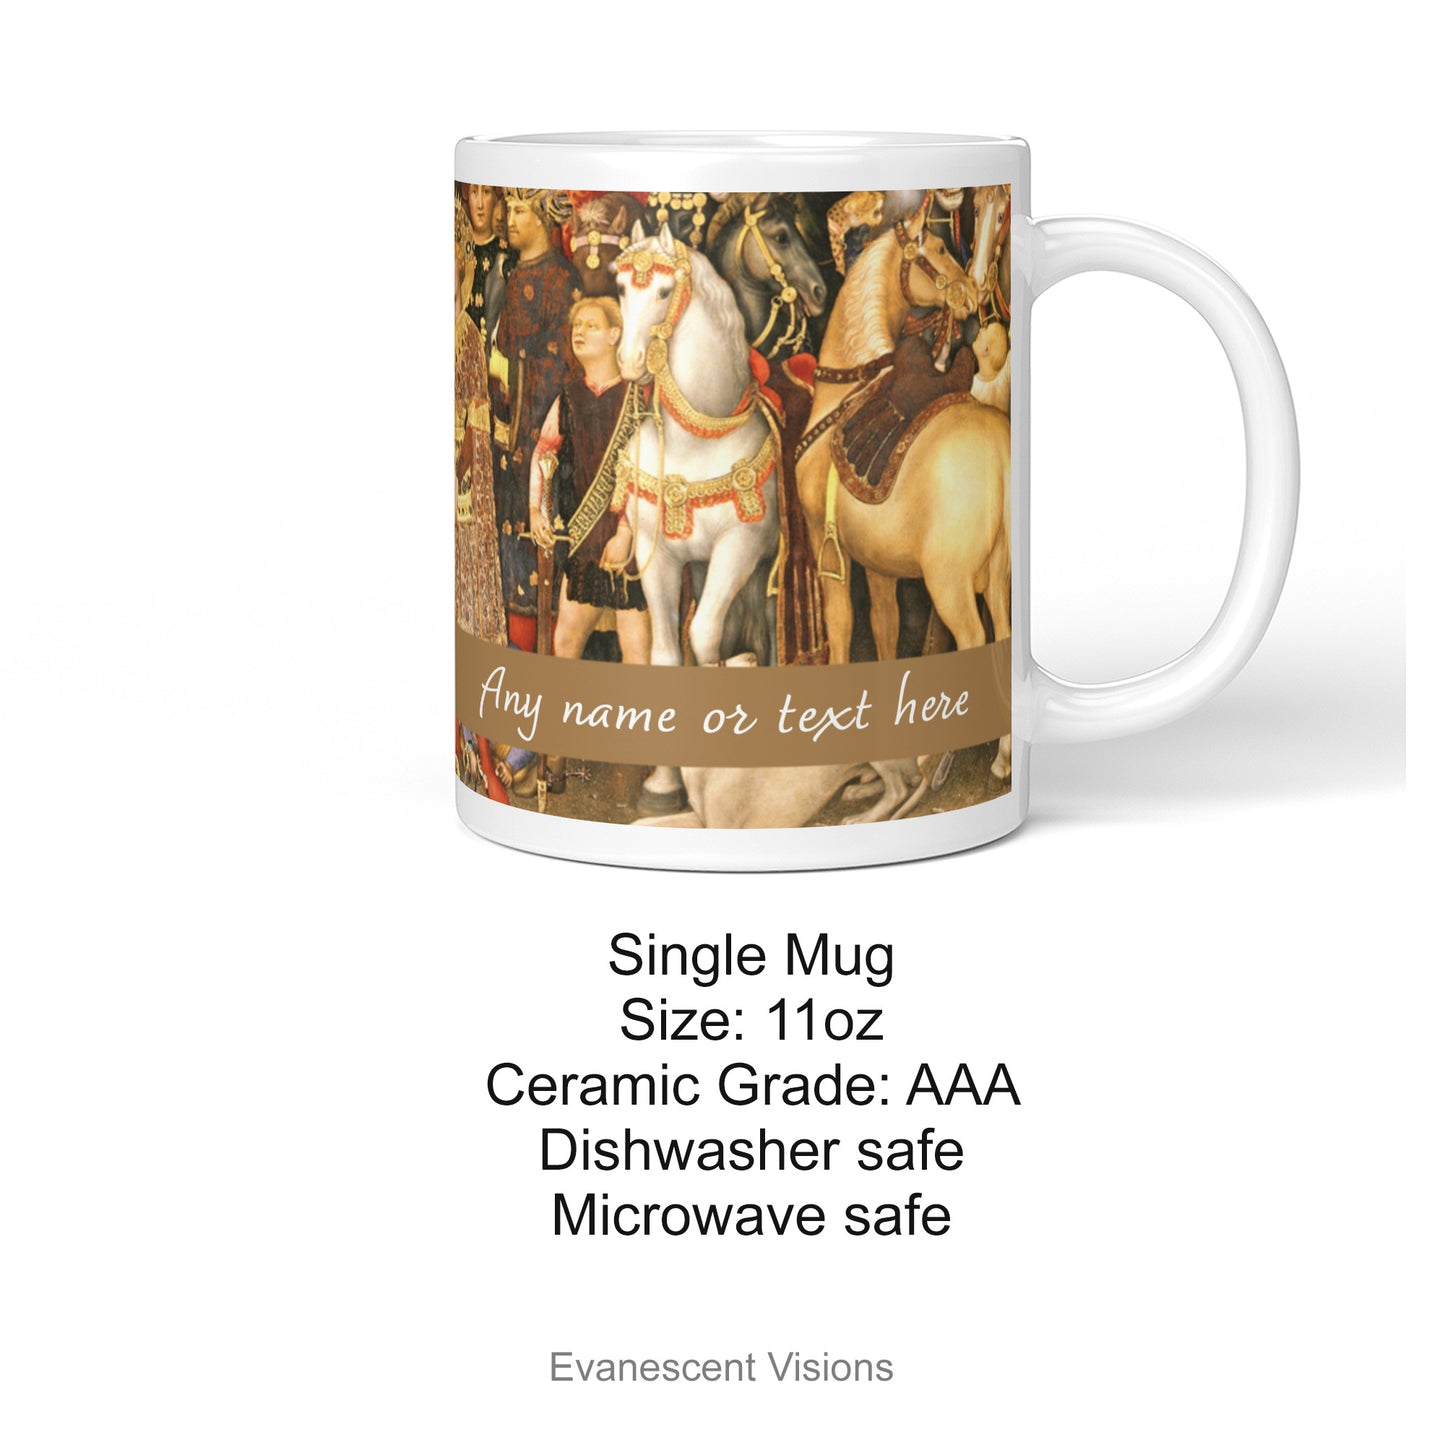 Product details for the Left and right sides of the Adoration of the Magi nativity scene personalised ceramic mug